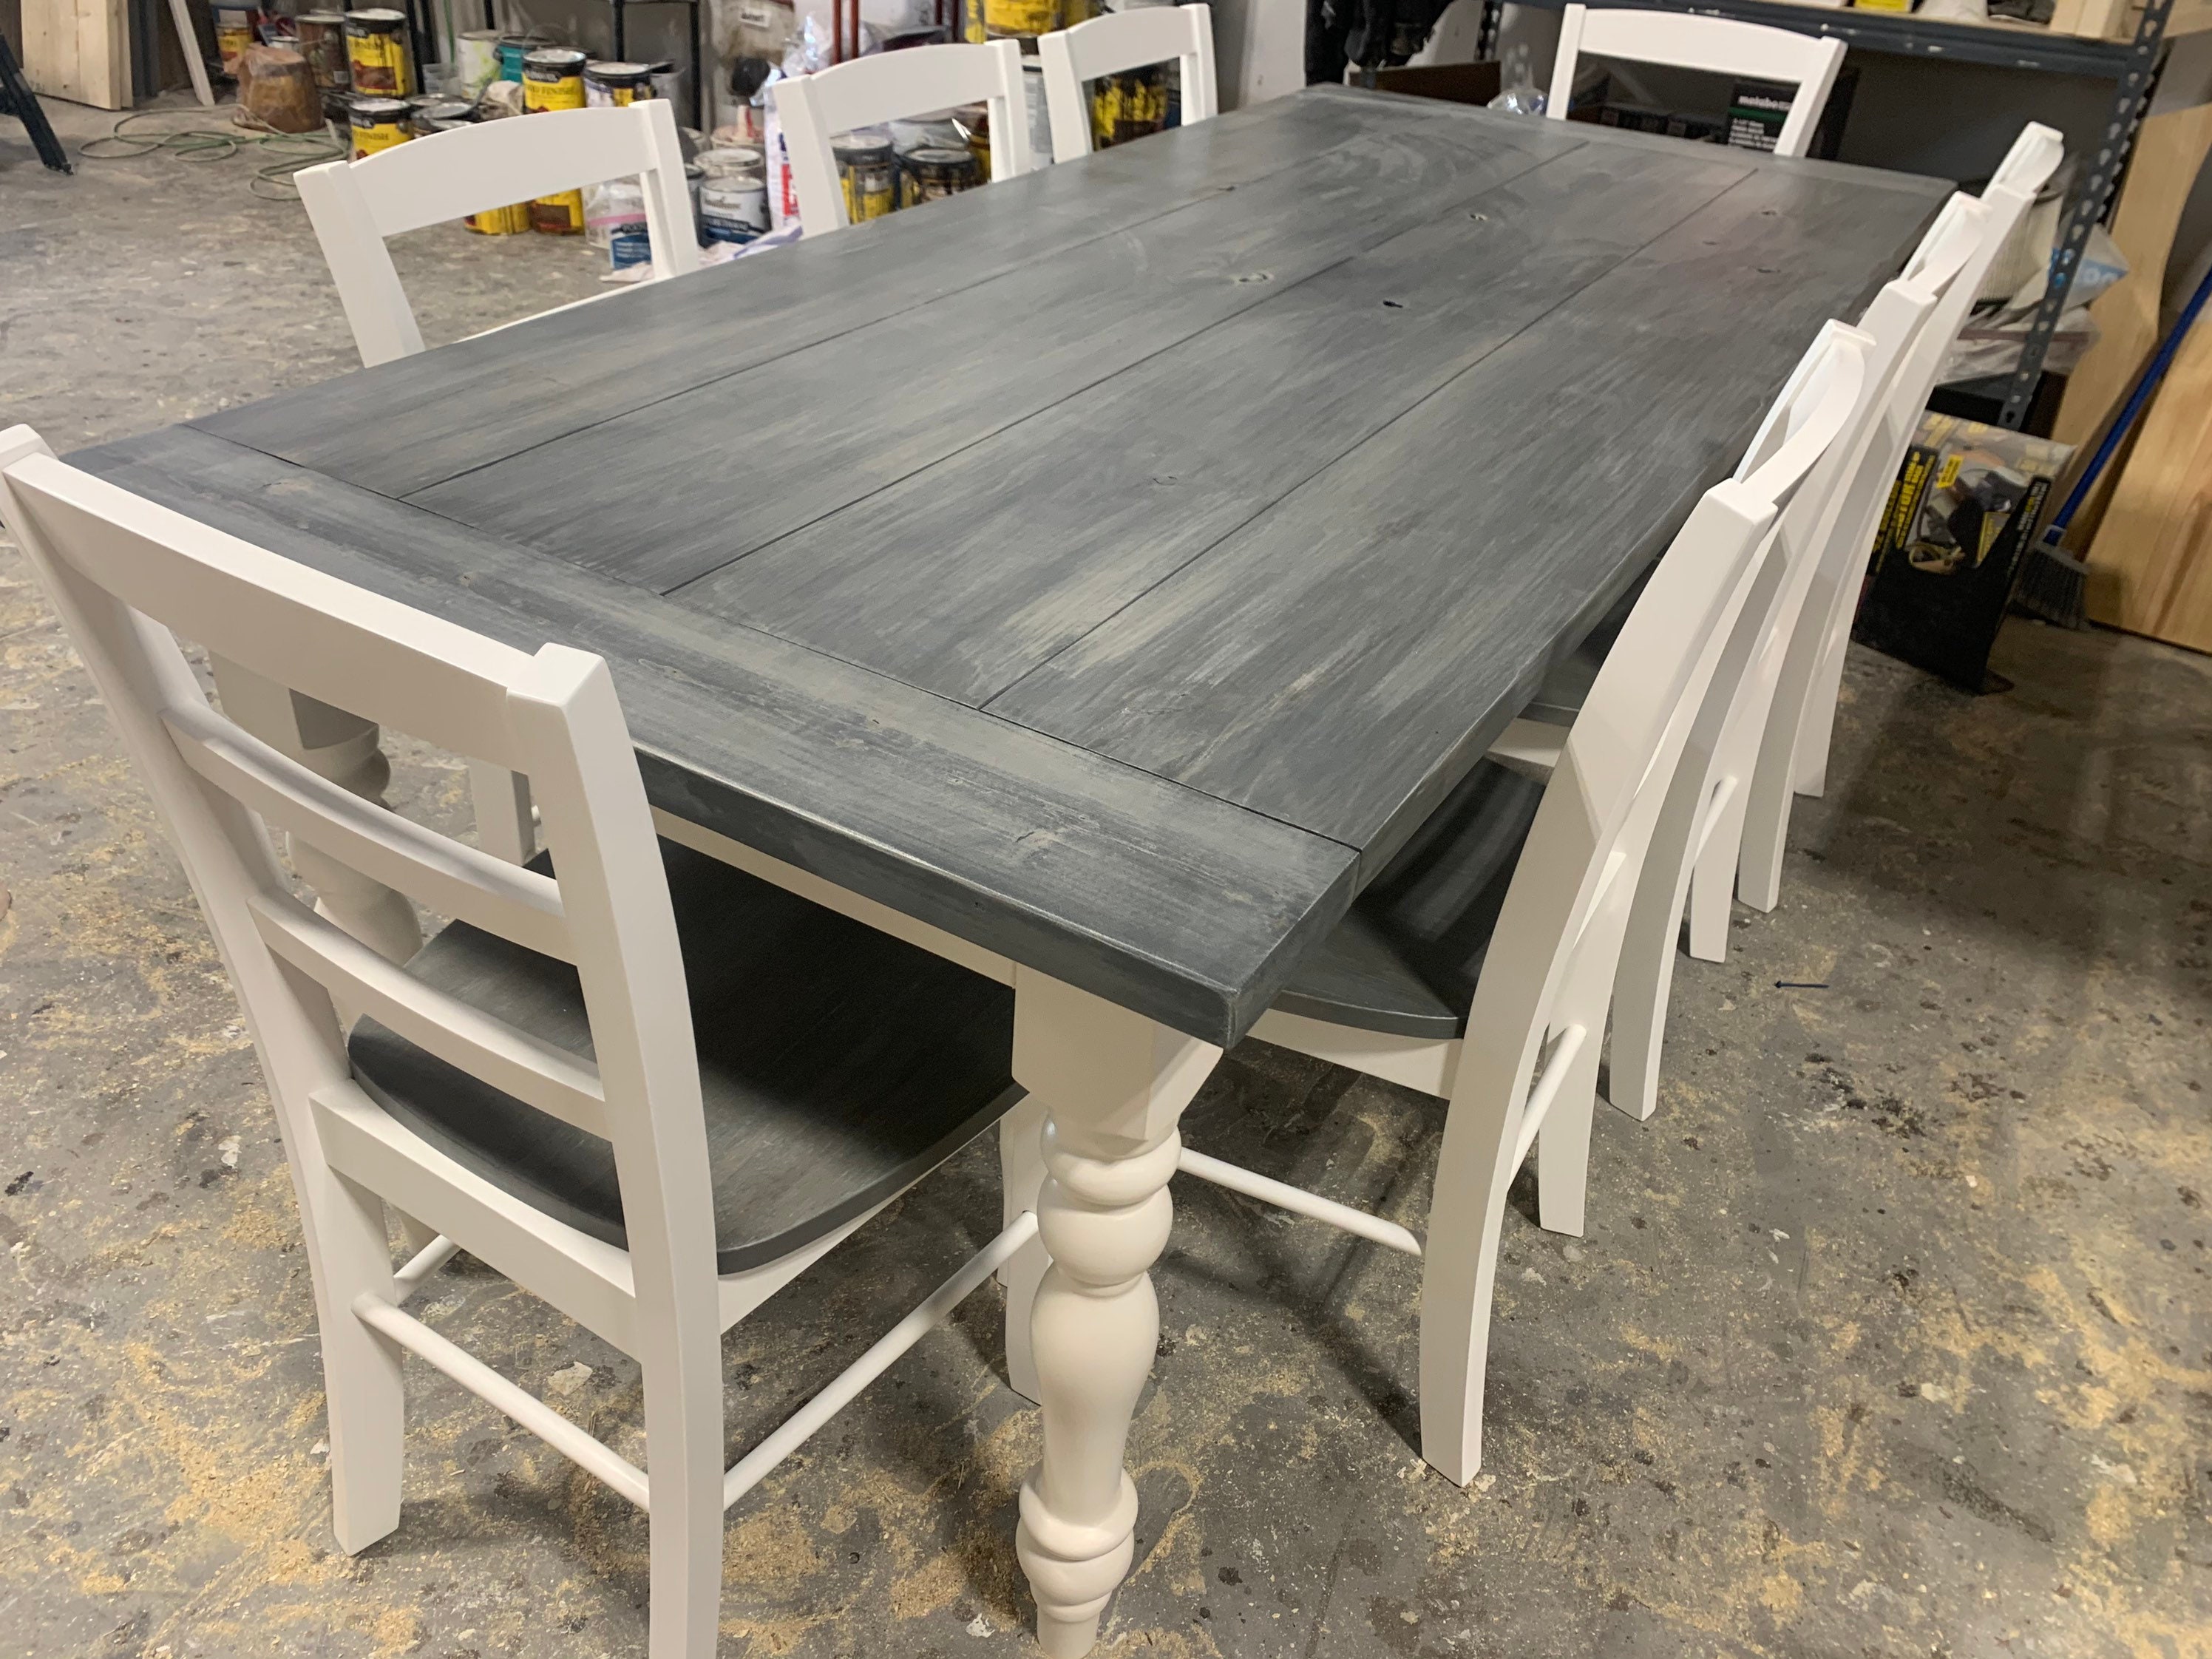 7ft Rustic Farmhouse Table With Turned, 7ft Dining Room Table And 4 Chairs